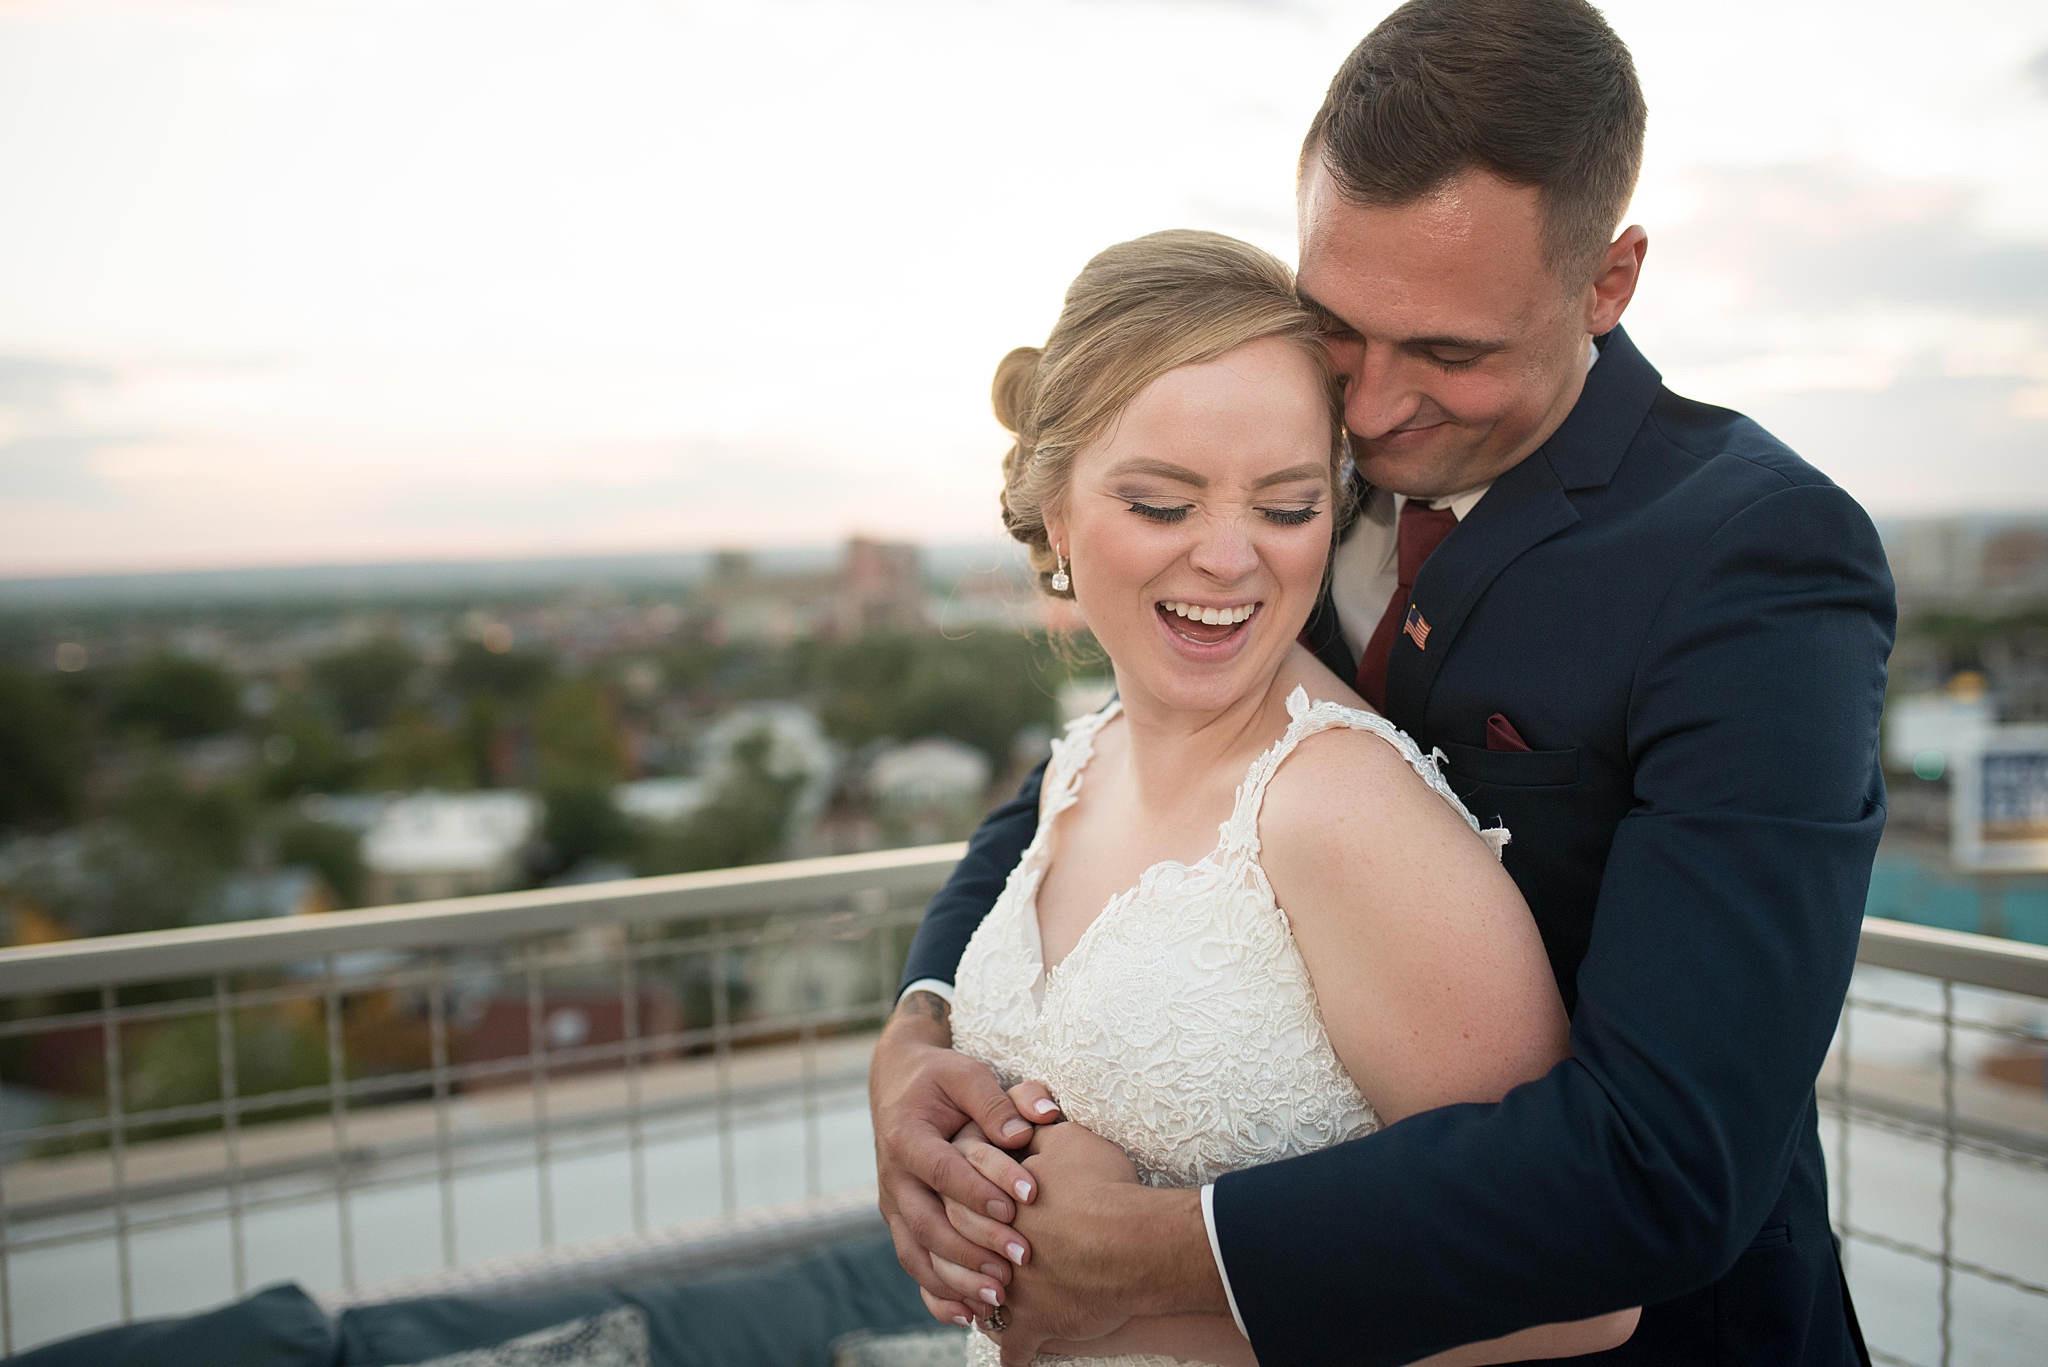 Wedding dress Ann Matthews, jewelry by helzberg diamonds, suits by suits unlimited, hotel parque central wedding photographed by albuquerque wedding photographer kayla kitts rooftop wedding